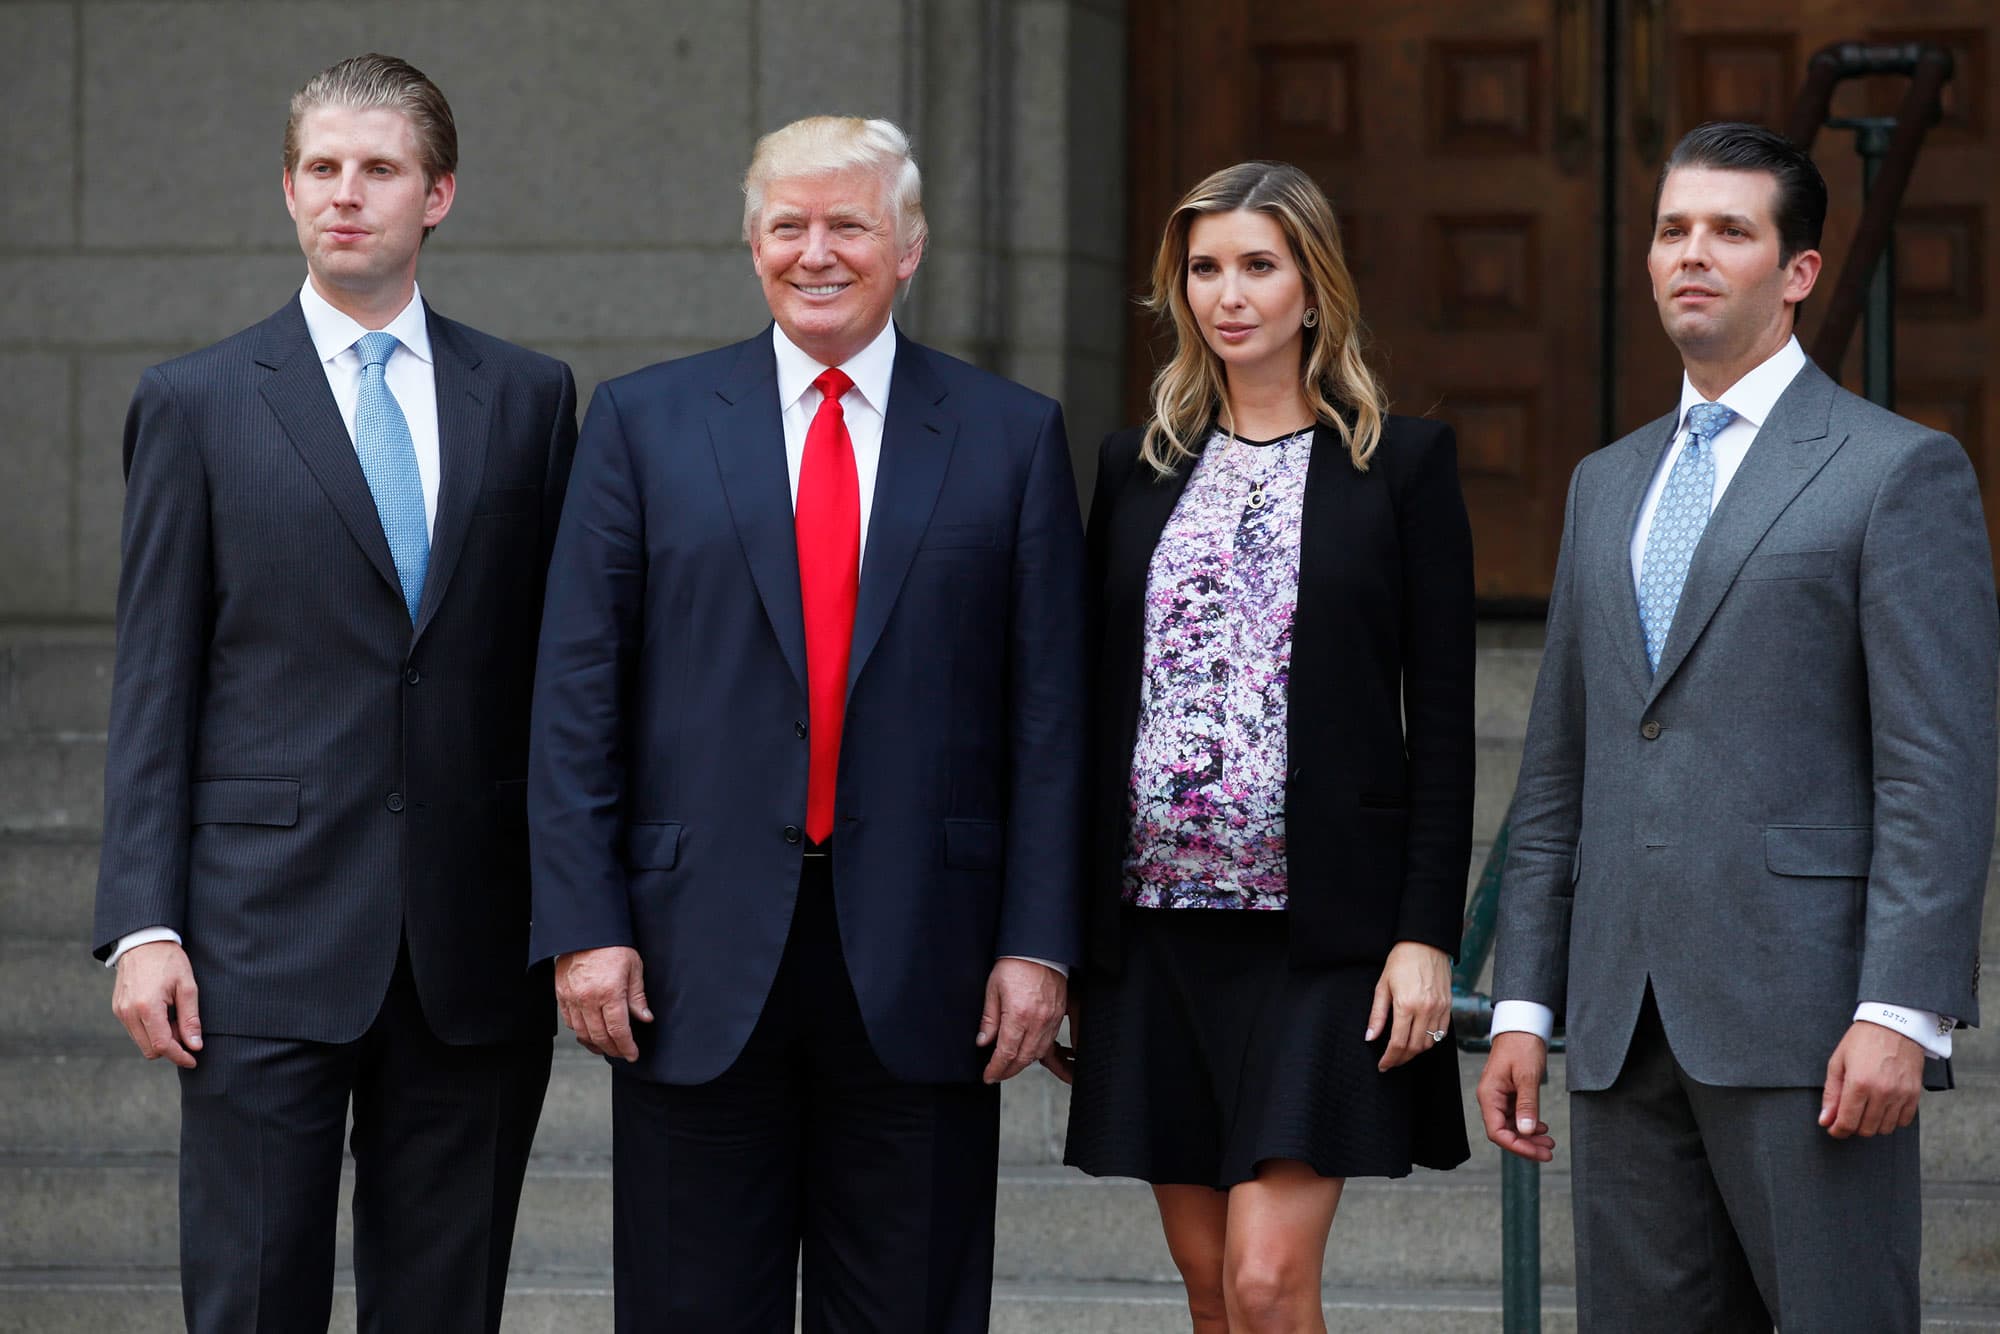 New York attorney general sues Trump and family over charity, claiming 'illegal conduct' for 'more than a decade'